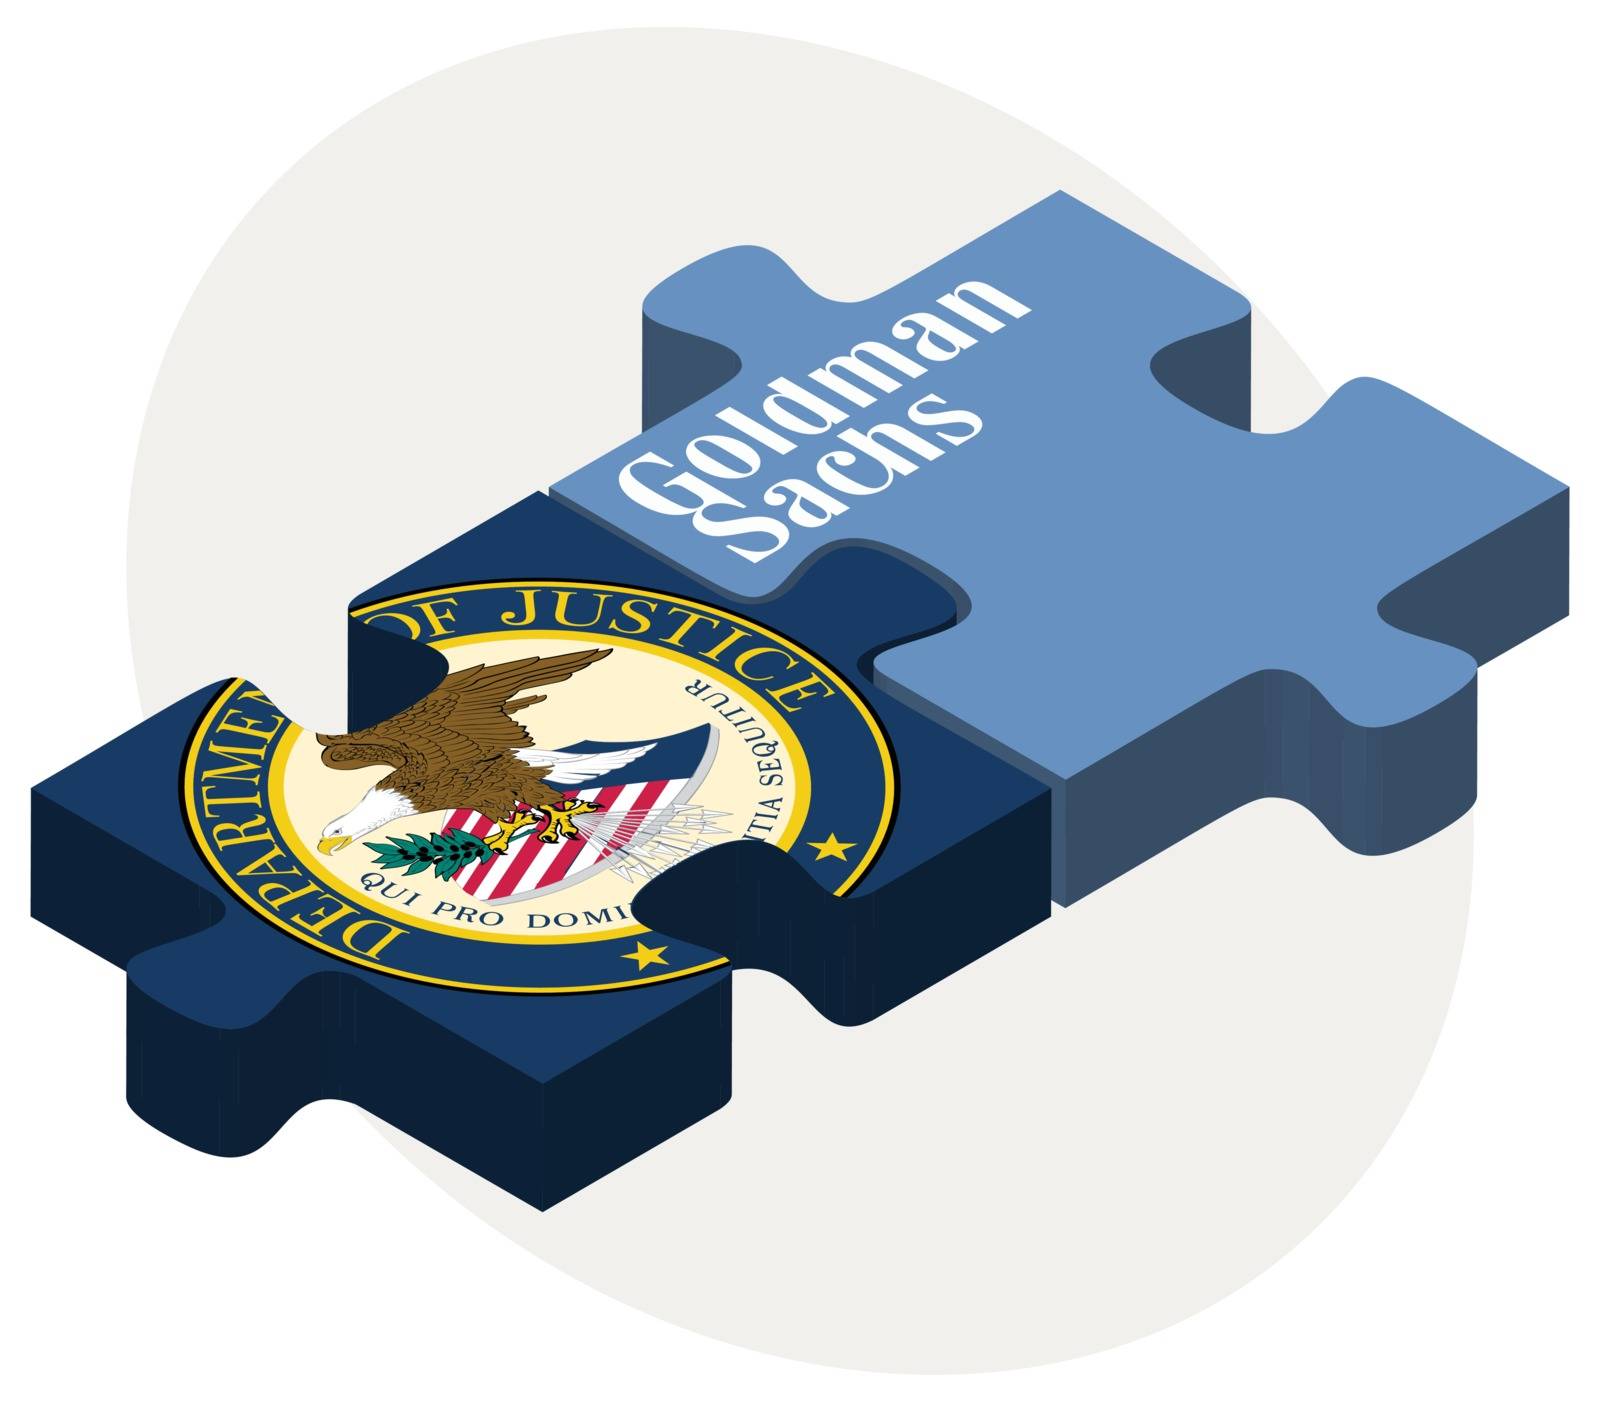 ISTANBUL, TURKEY - JUNE 08, 2015: United States Department of Justice Seal and The Goldman Sachs Group, Inc. logotype in puzzle form on white background. The Goldman Sachs Group, Inc. is an American multinational investment banking firm that engages in global investment banking, securities, investment management, and other financial services primarily with institutional clients.
